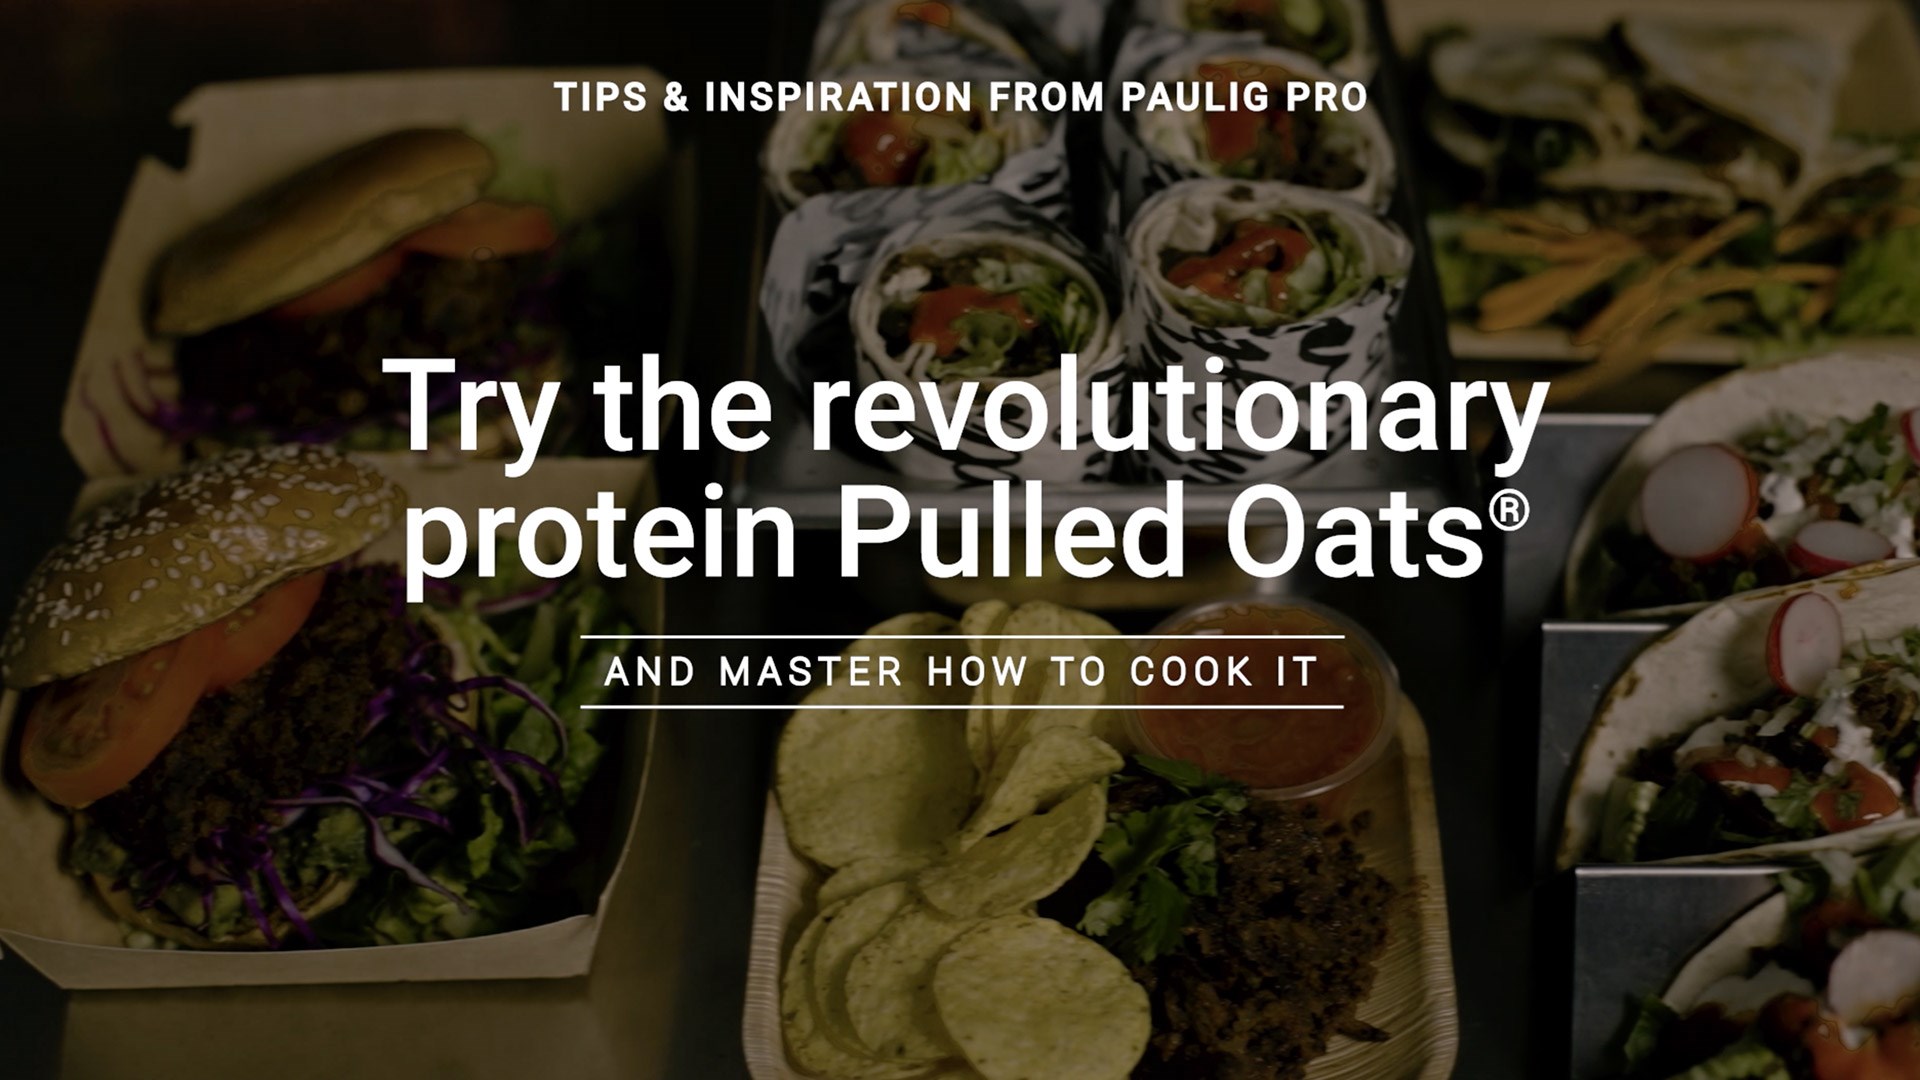 Pulled Oats